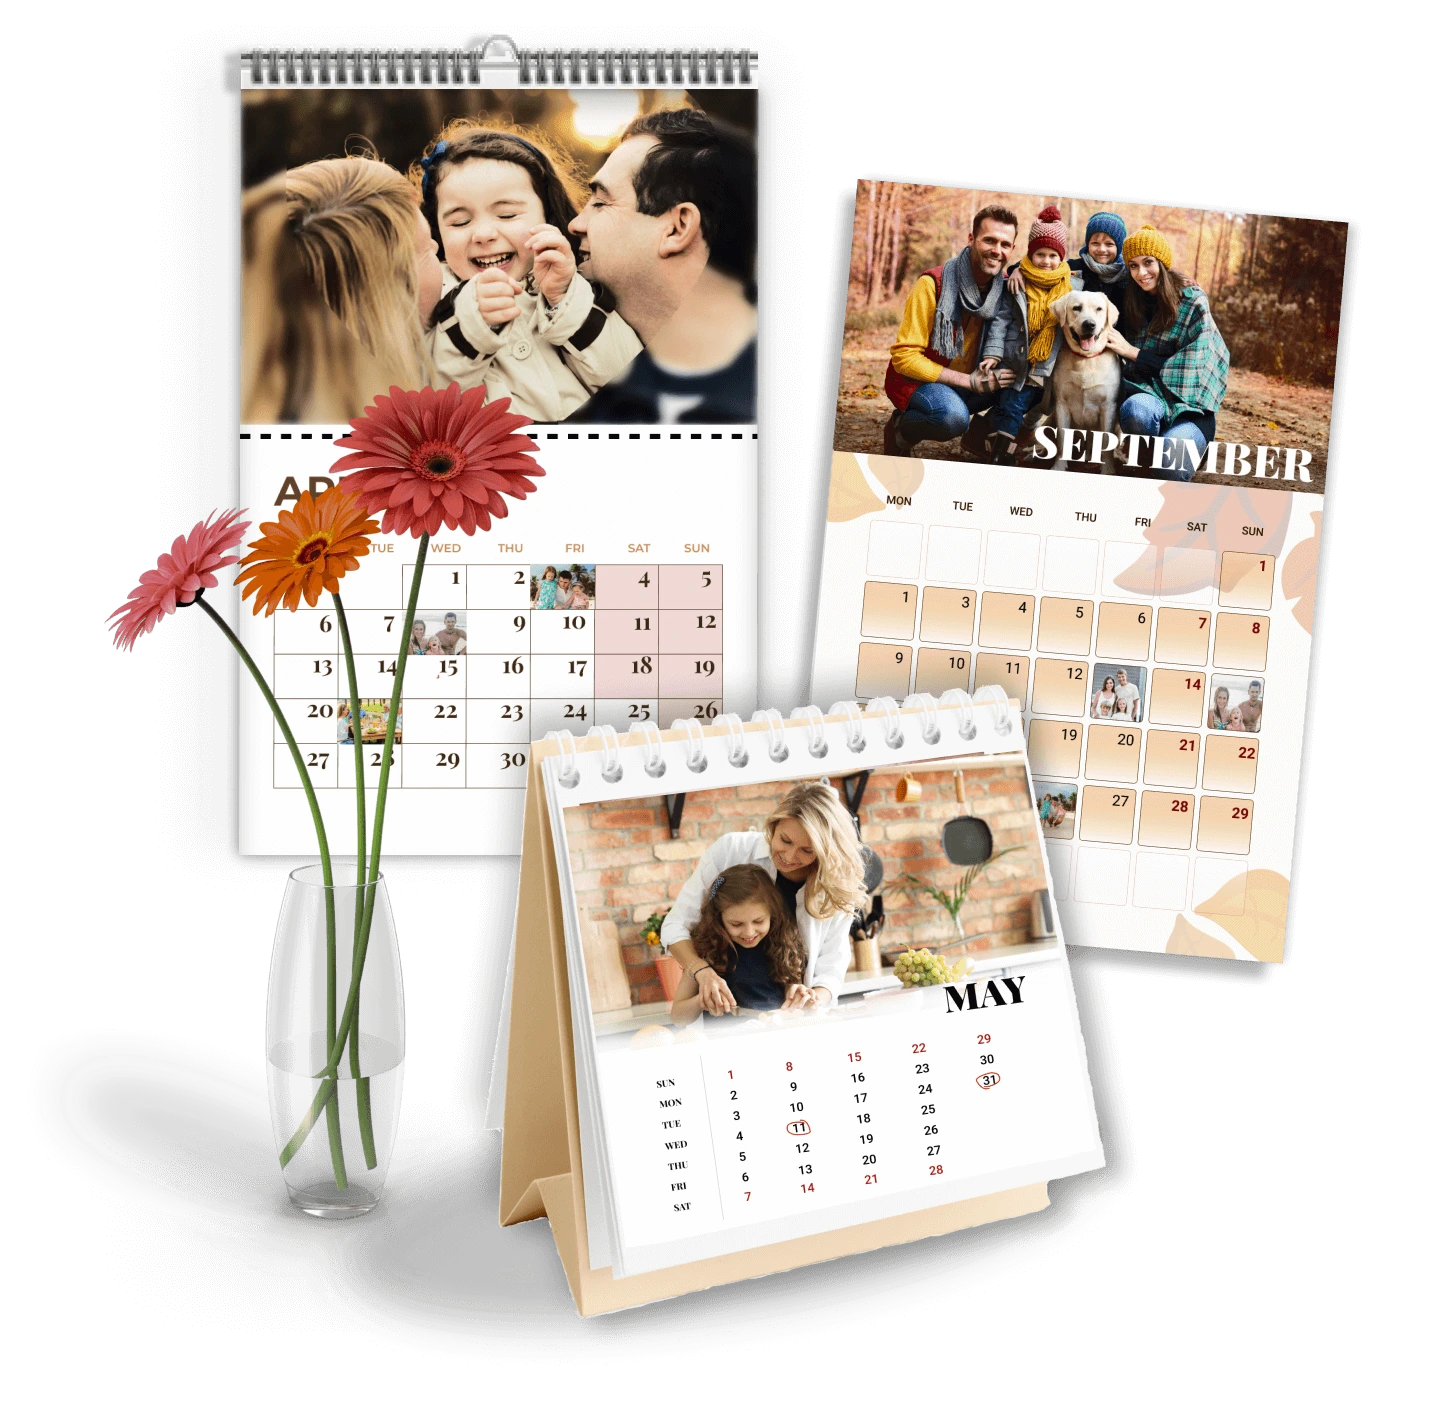 Want to design your own photo calendar?